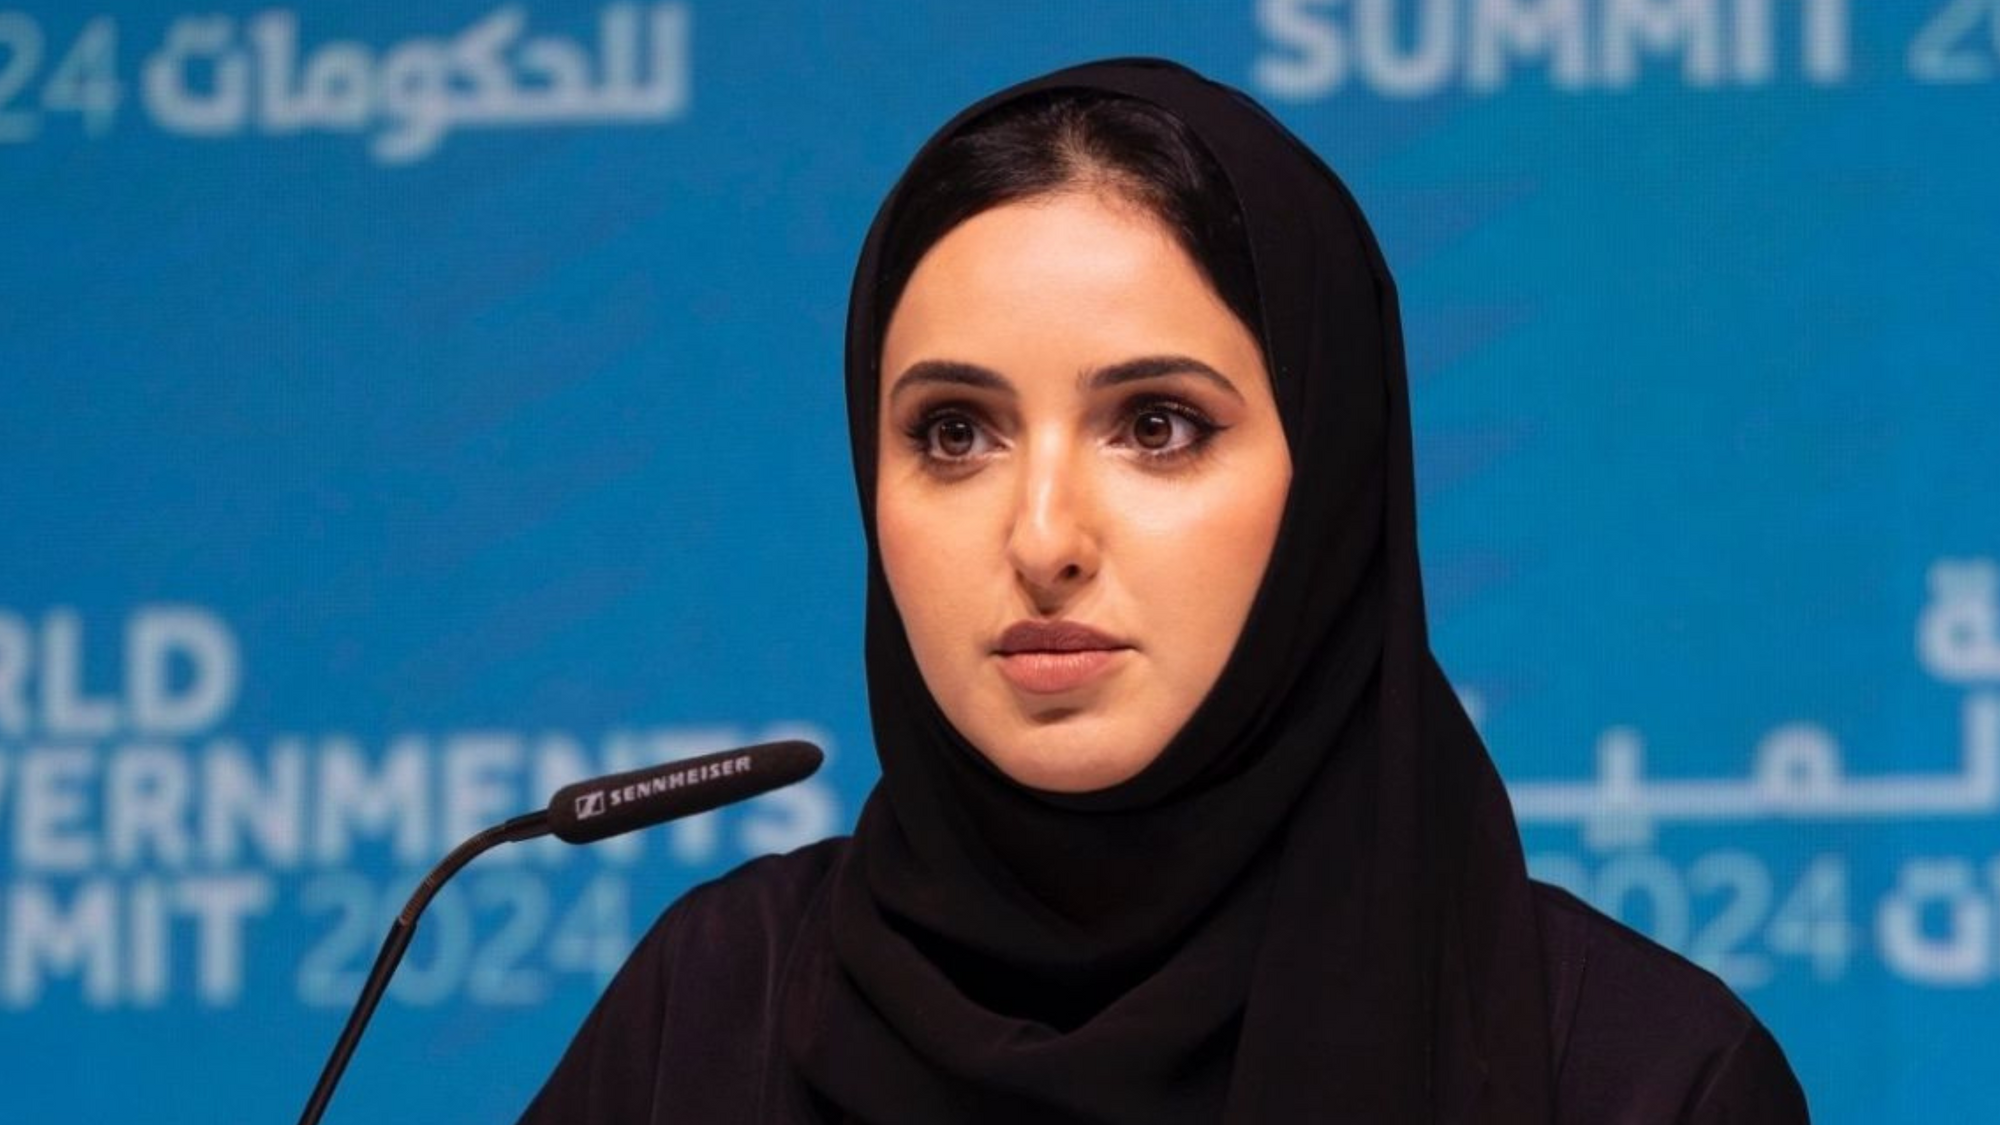 Dr. Ebtesam Almazrouei appointed Chairperson of UN’s AI for Good Impact initiative